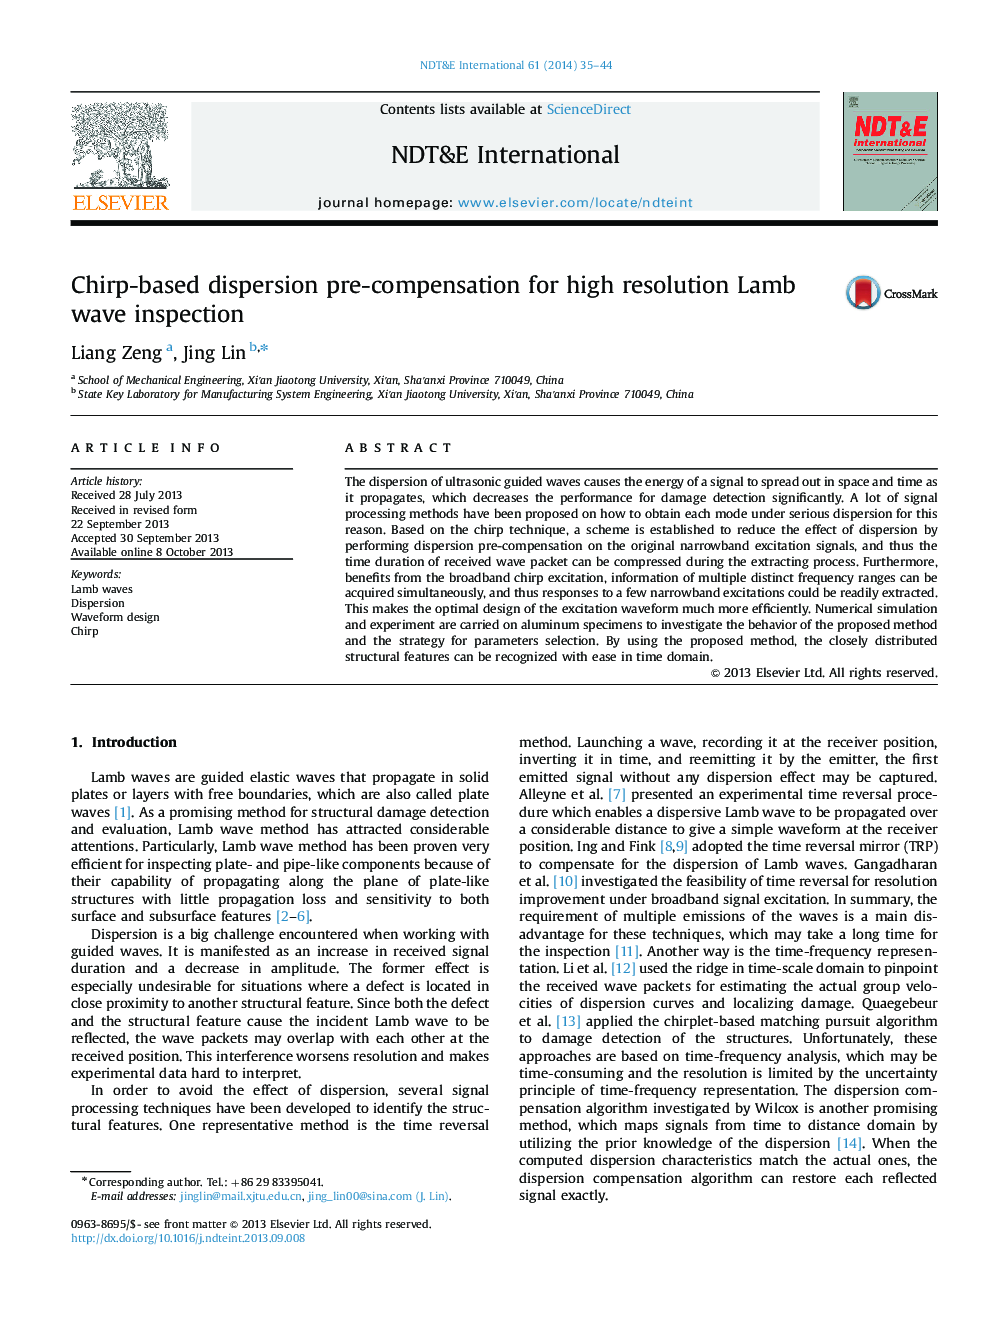 Chirp-based dispersion pre-compensation for high resolution Lamb wave inspection